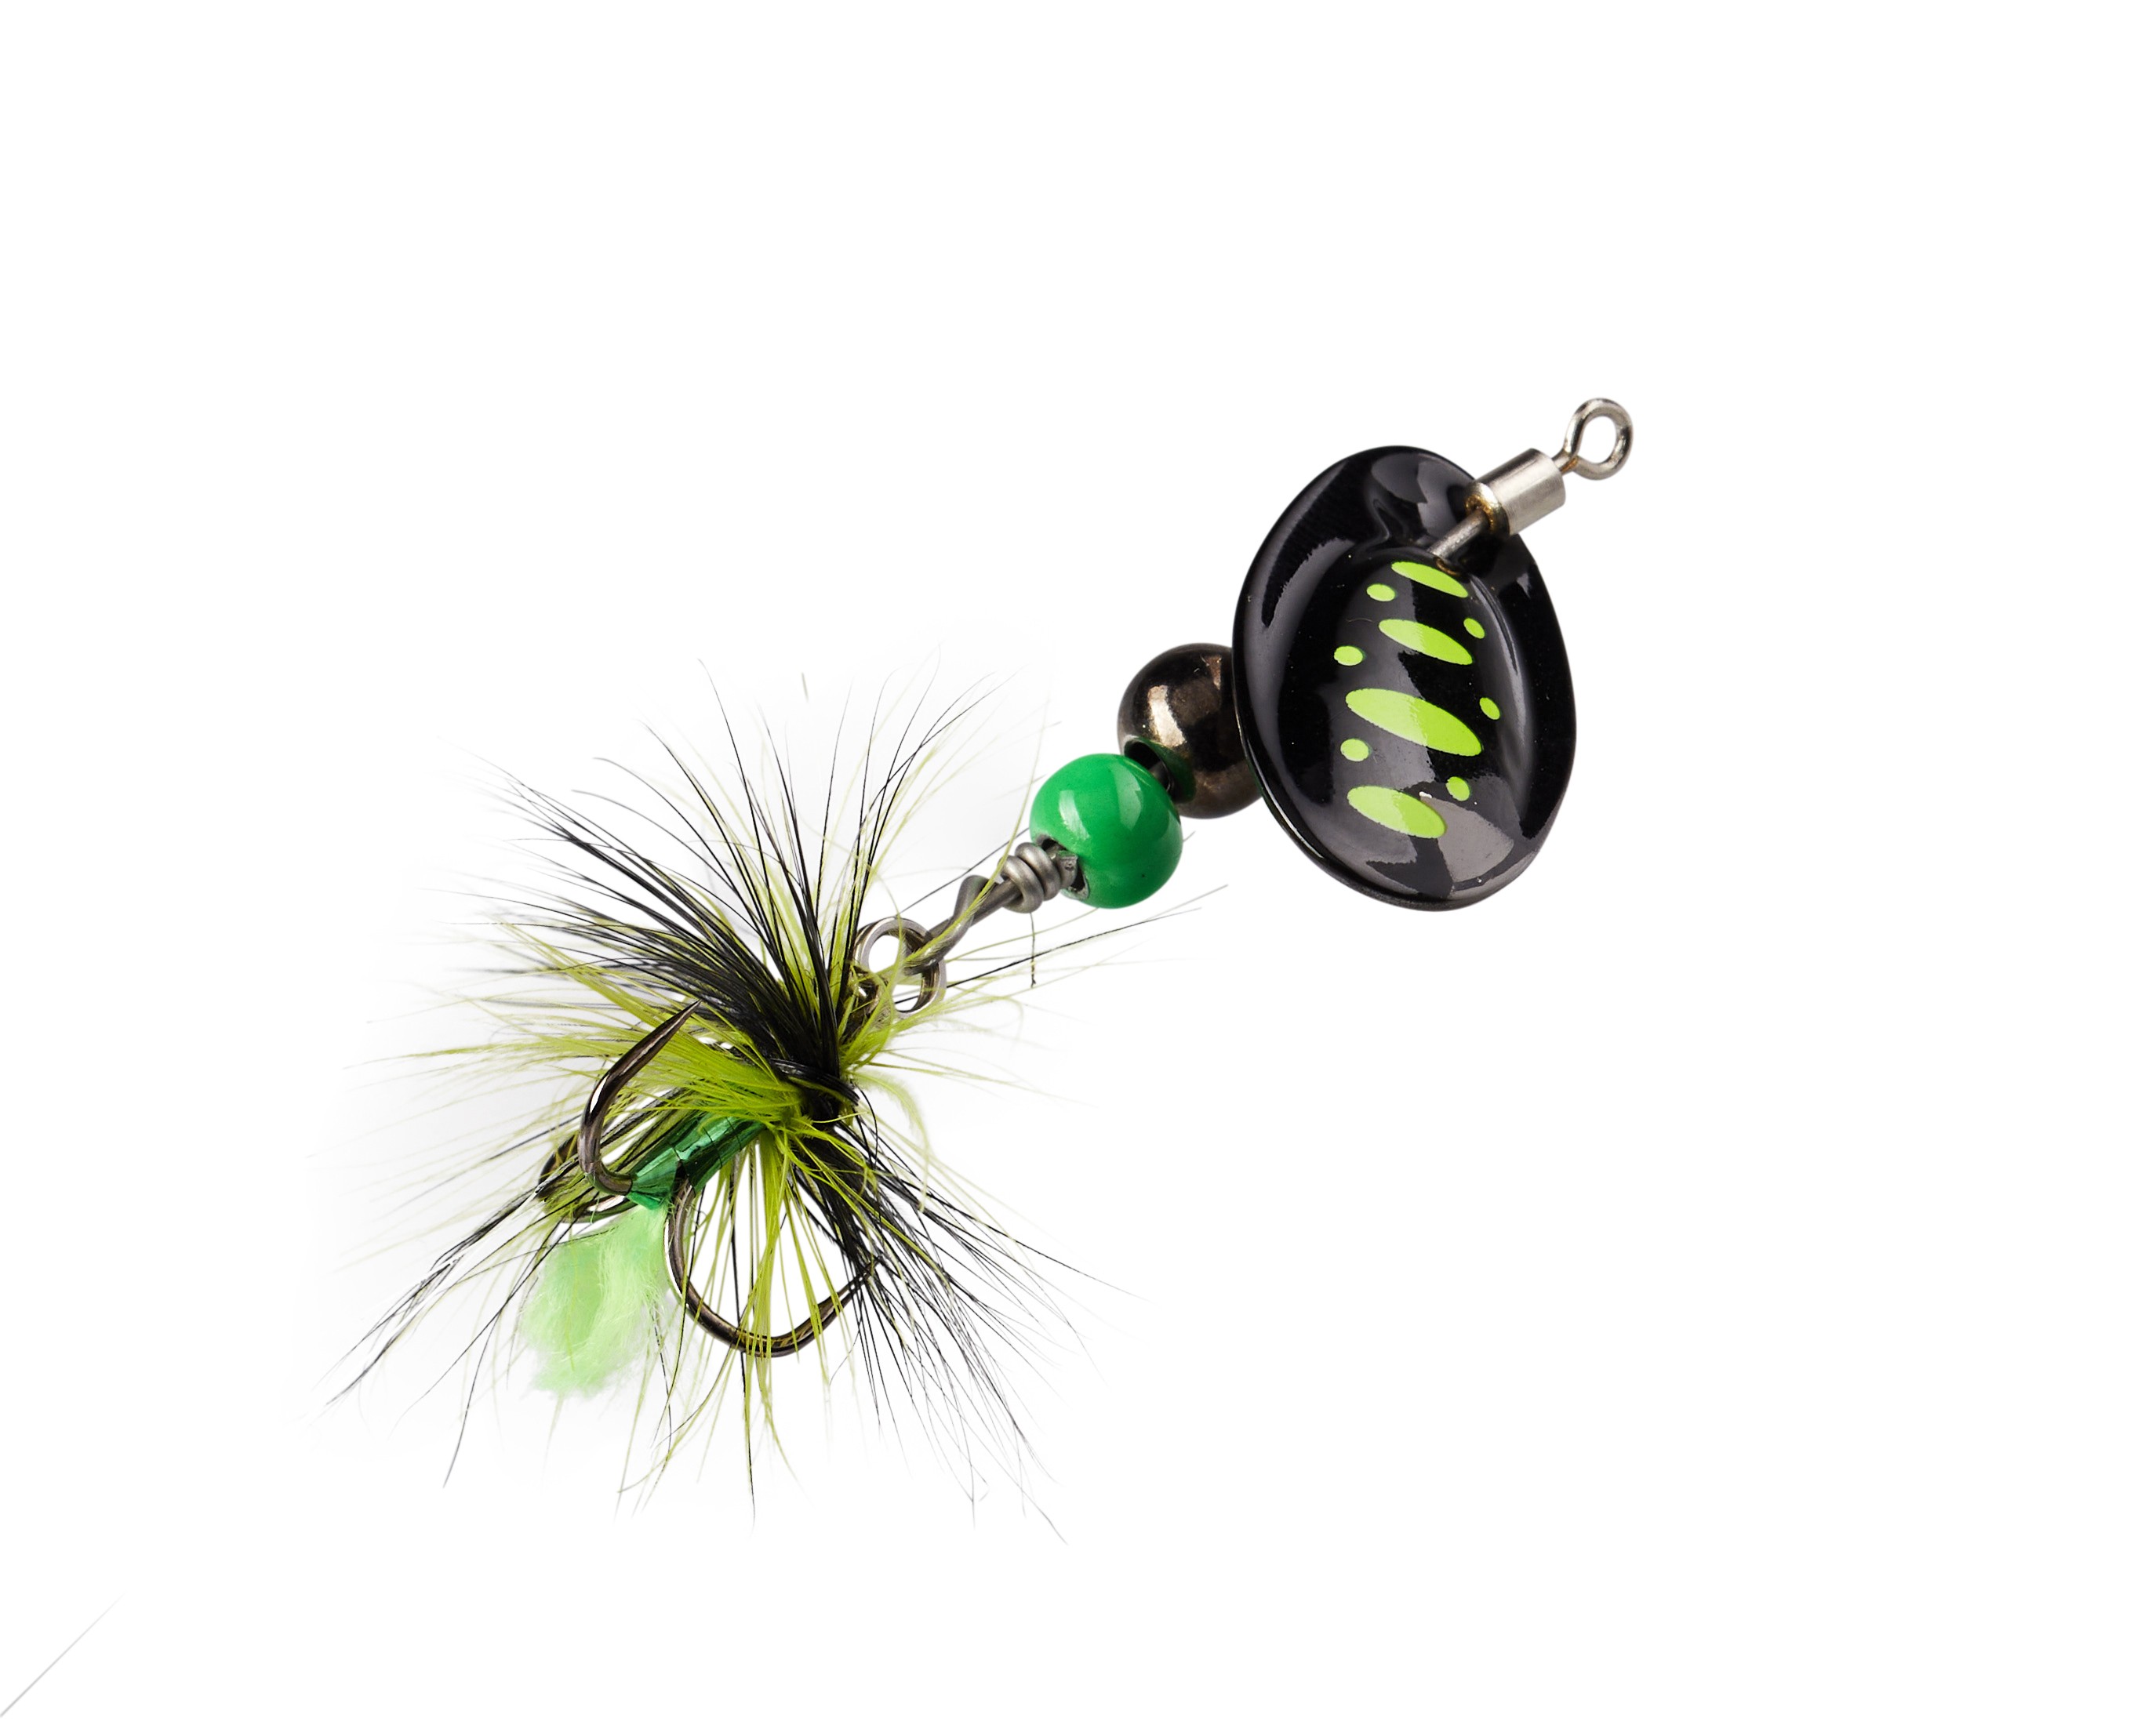 N°1 FLY bLACK-CHARTREUSE